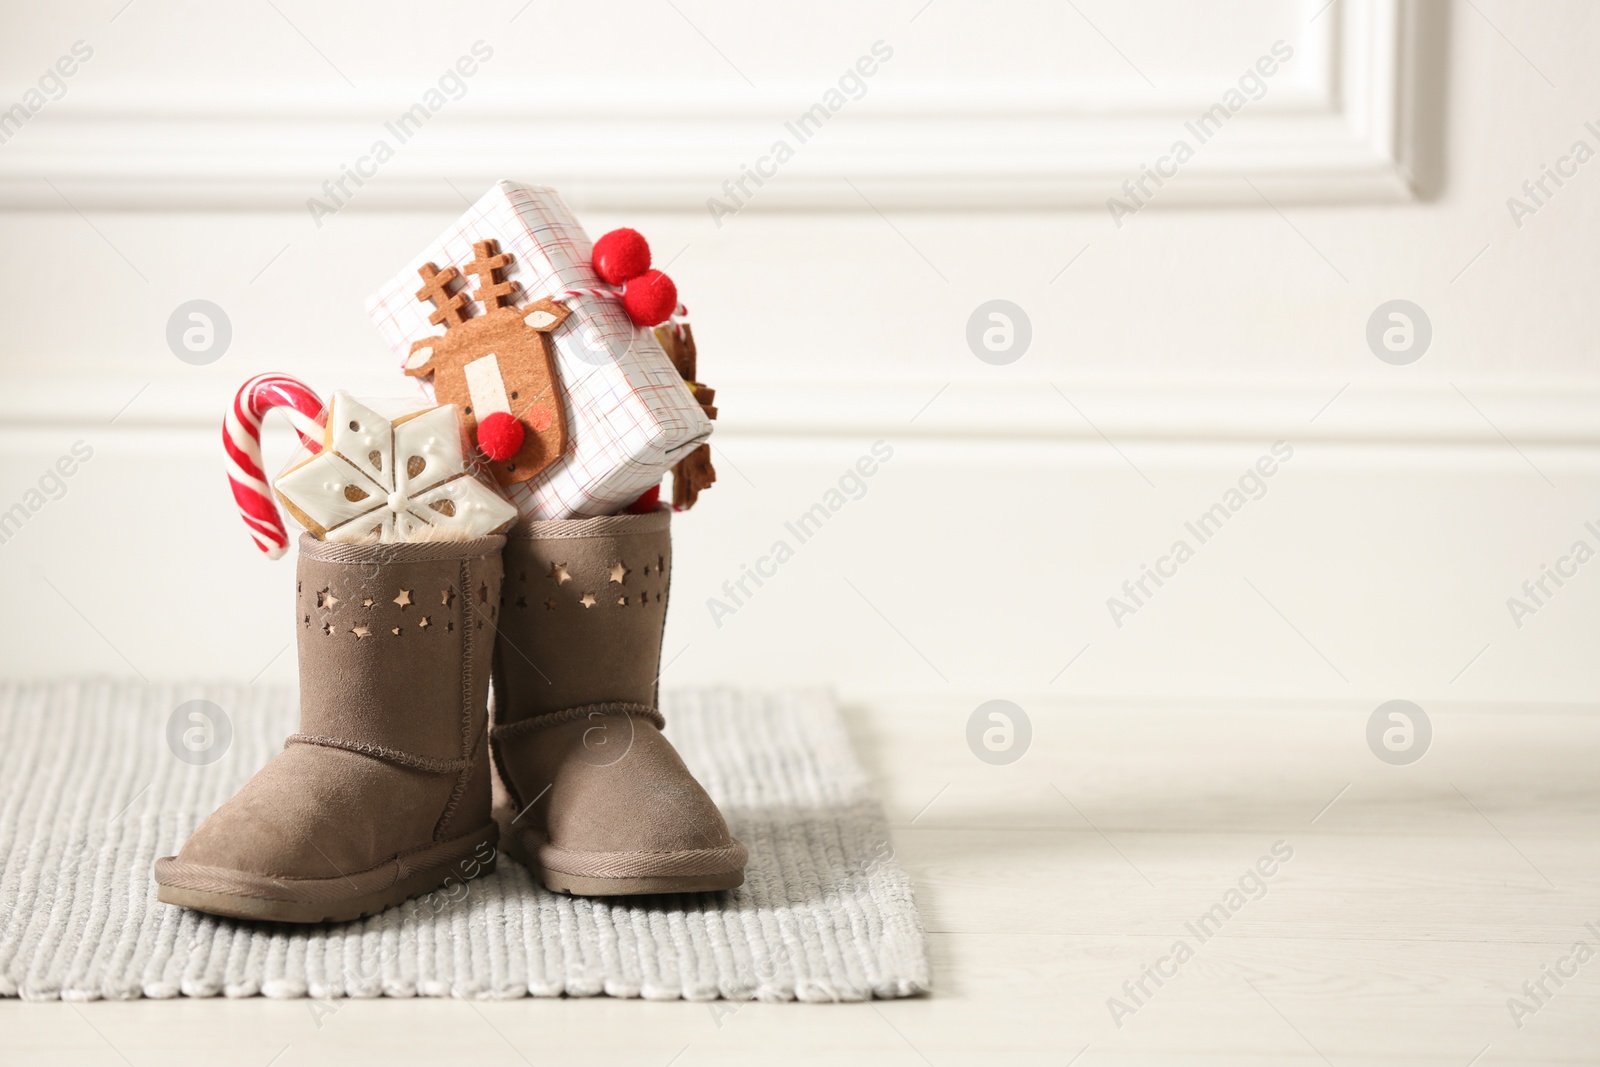 Photo of Sweets and gift box in child's boots indoors, space for text. St. Nicholas Day tradition